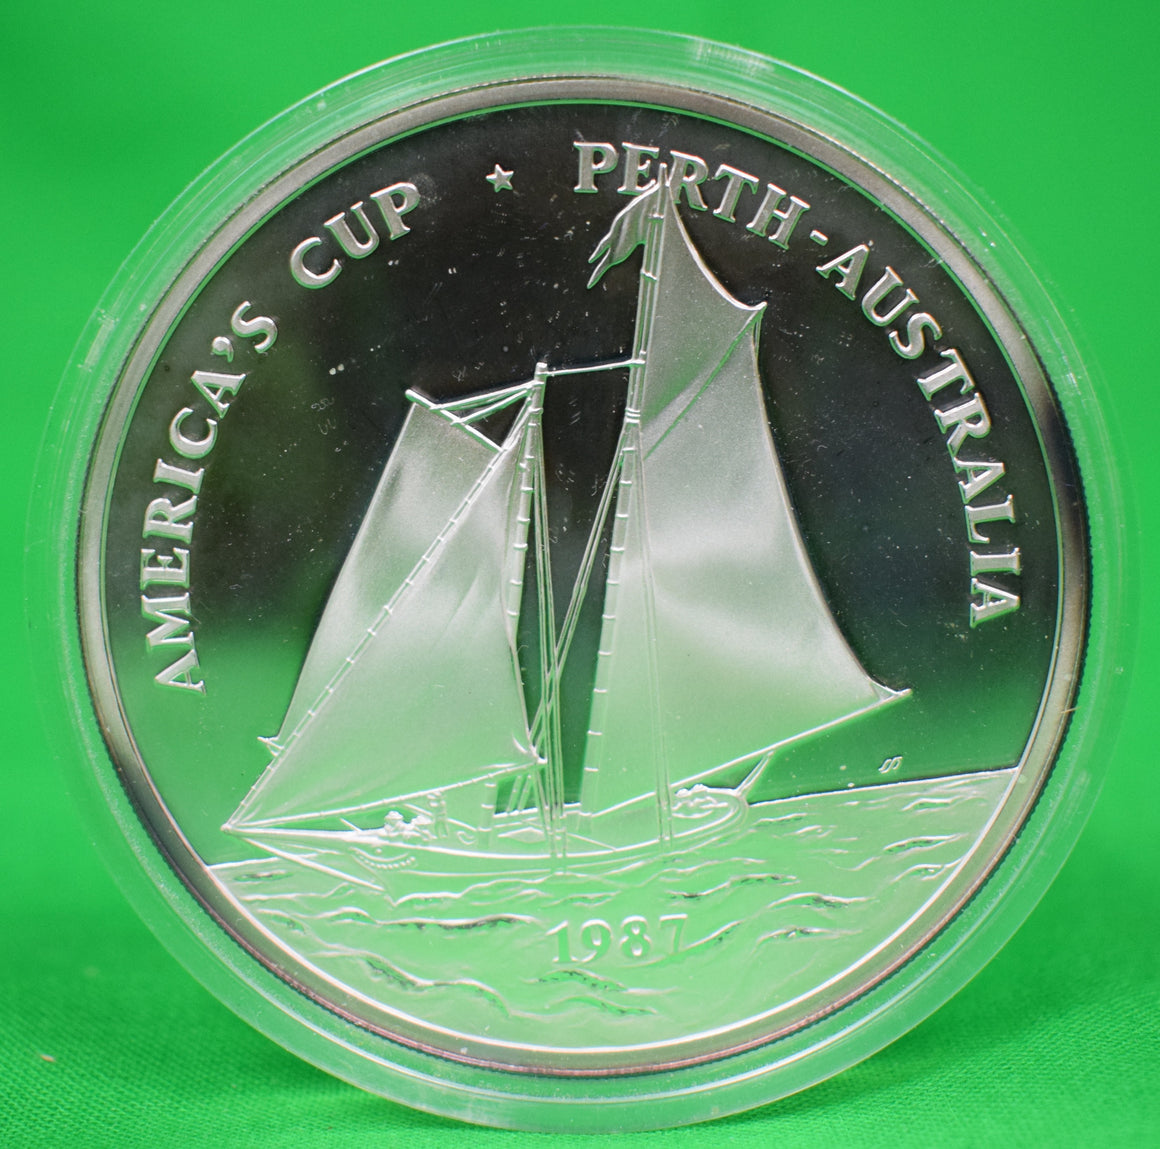 America's Cup Perth Australia 5 Troy Oz .999 Silver 1987 Proof $25 Coin (New in Box) (SOLD)